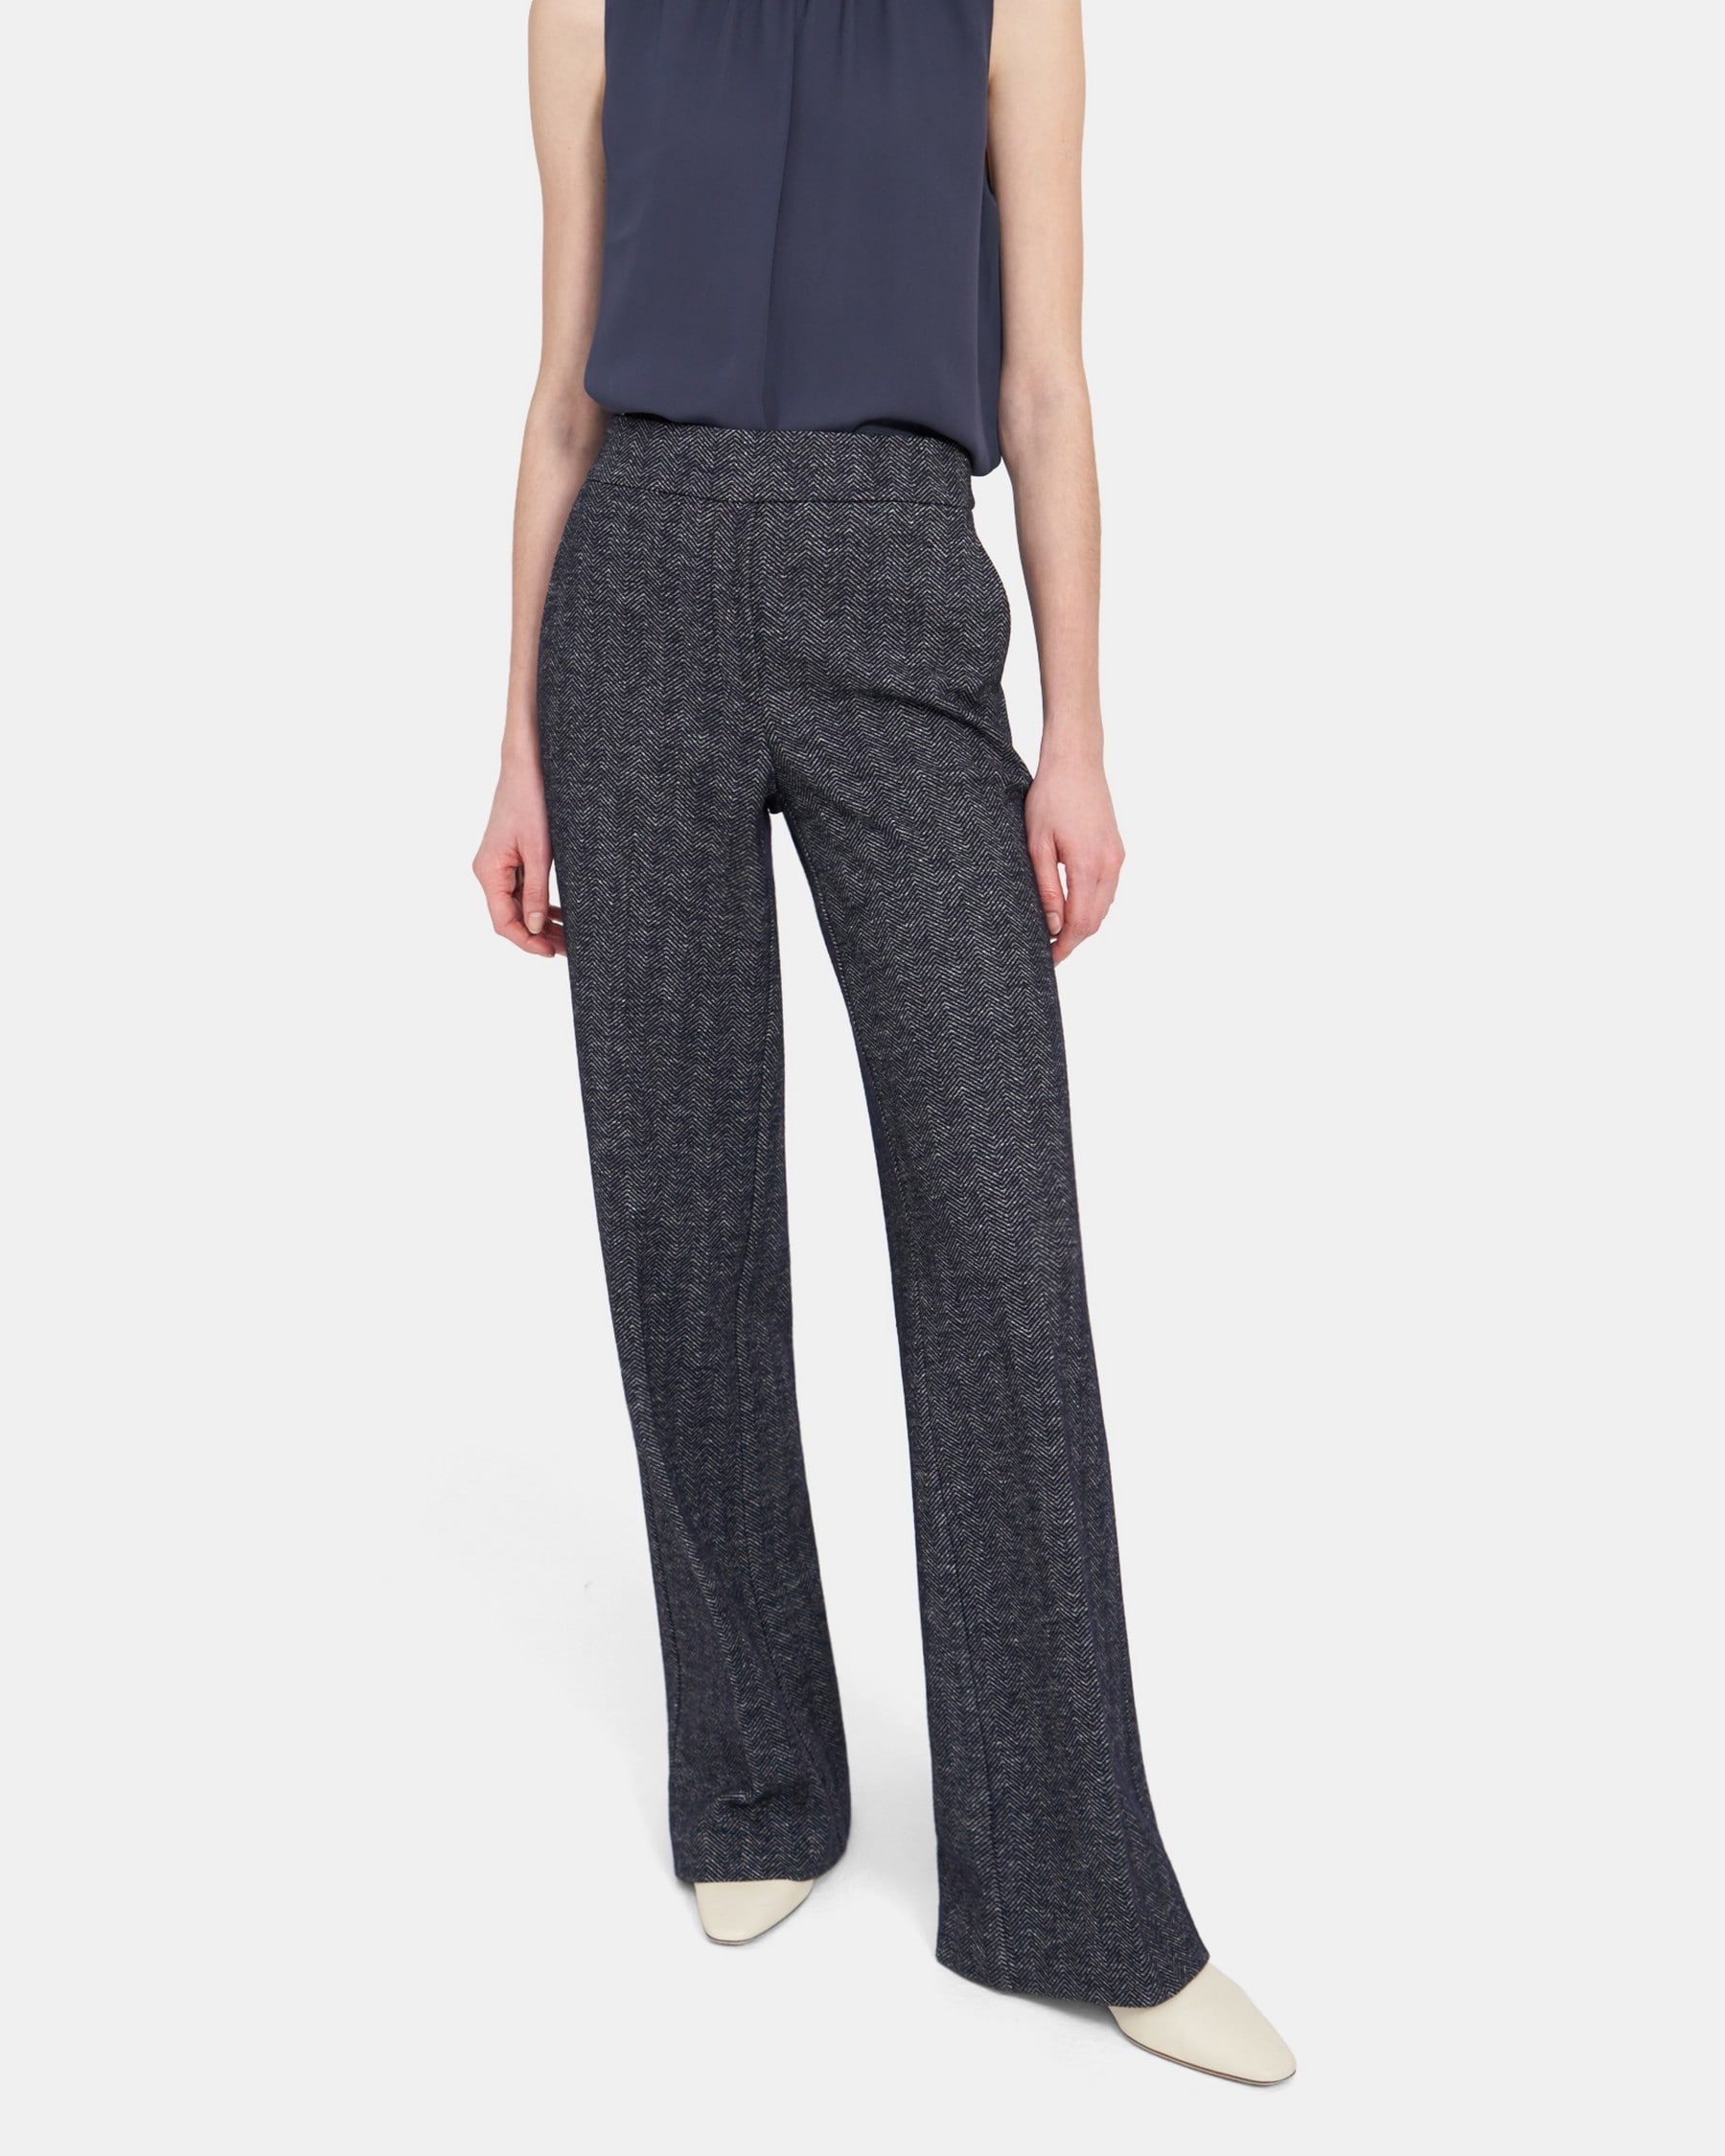 Flare Pant in Chevron Knit